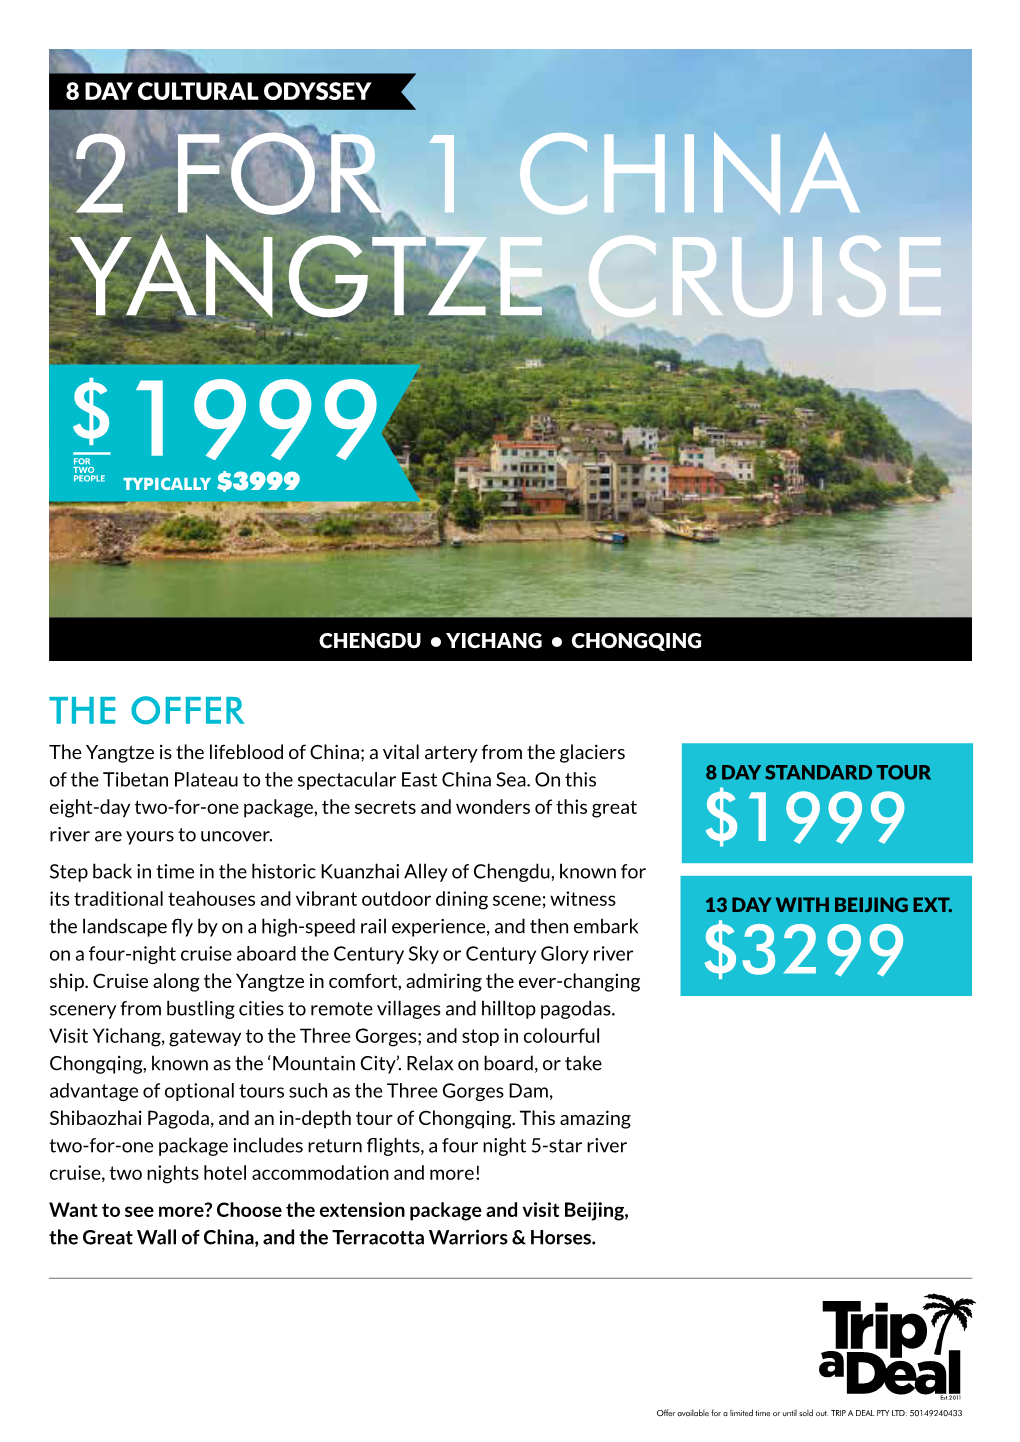 2 for 1 China Yangtze Cruise $ for Two 1999 People Typically $3999